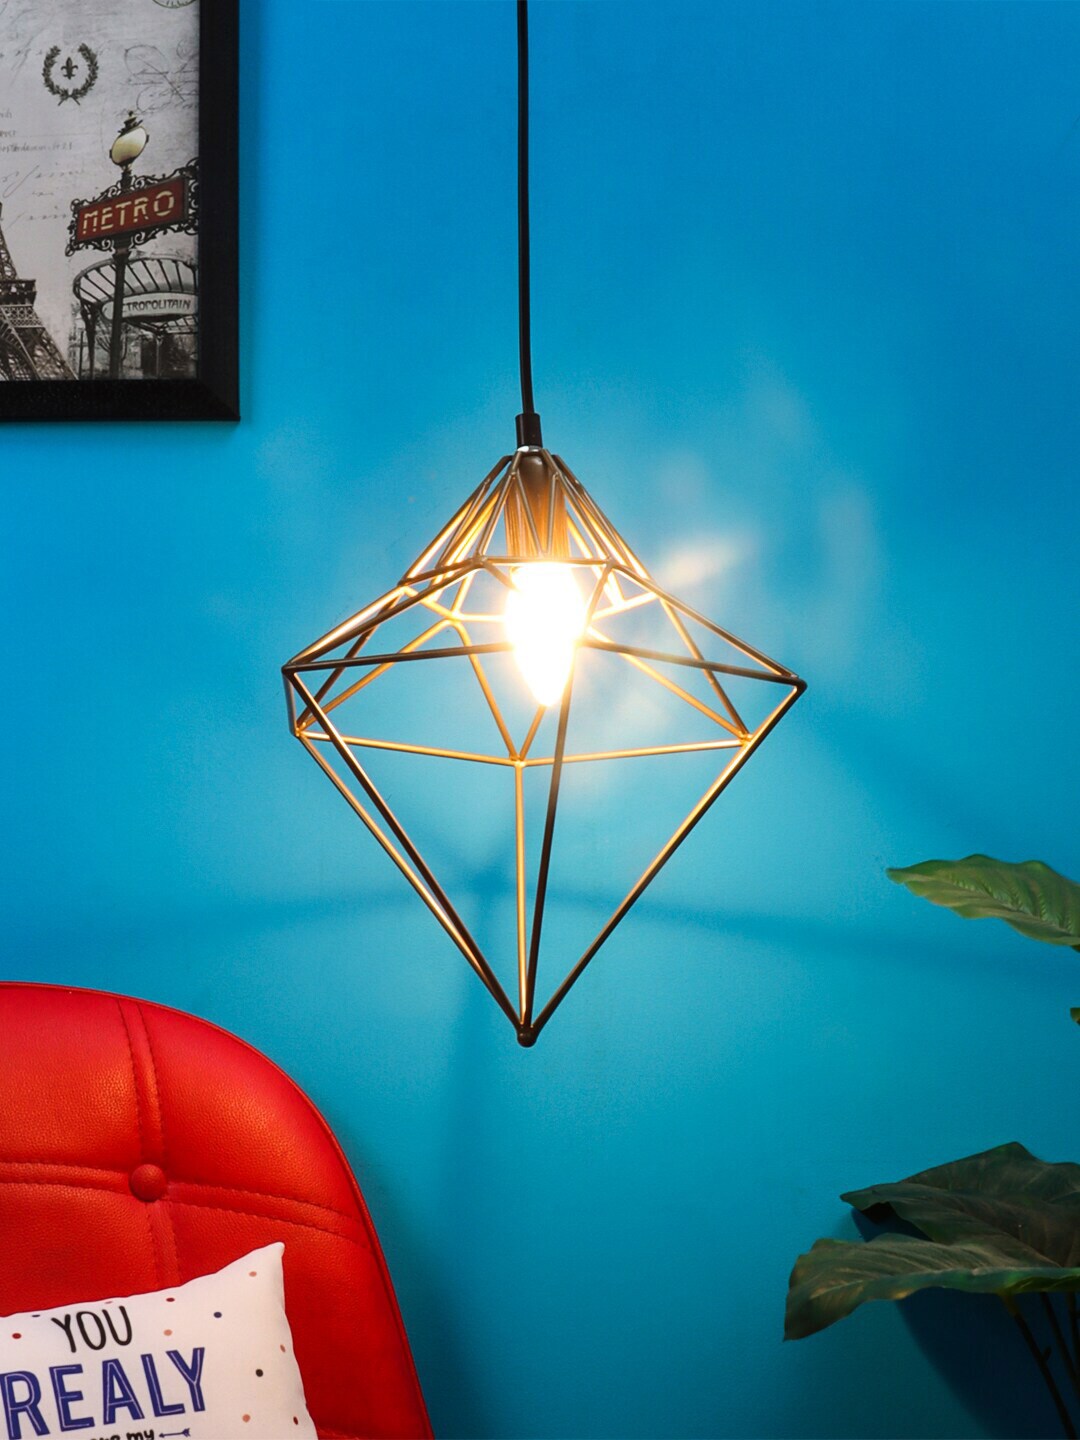 Aapno Rajasthan Gold-Toned Contemporary USP Pendant Lamp Price in India